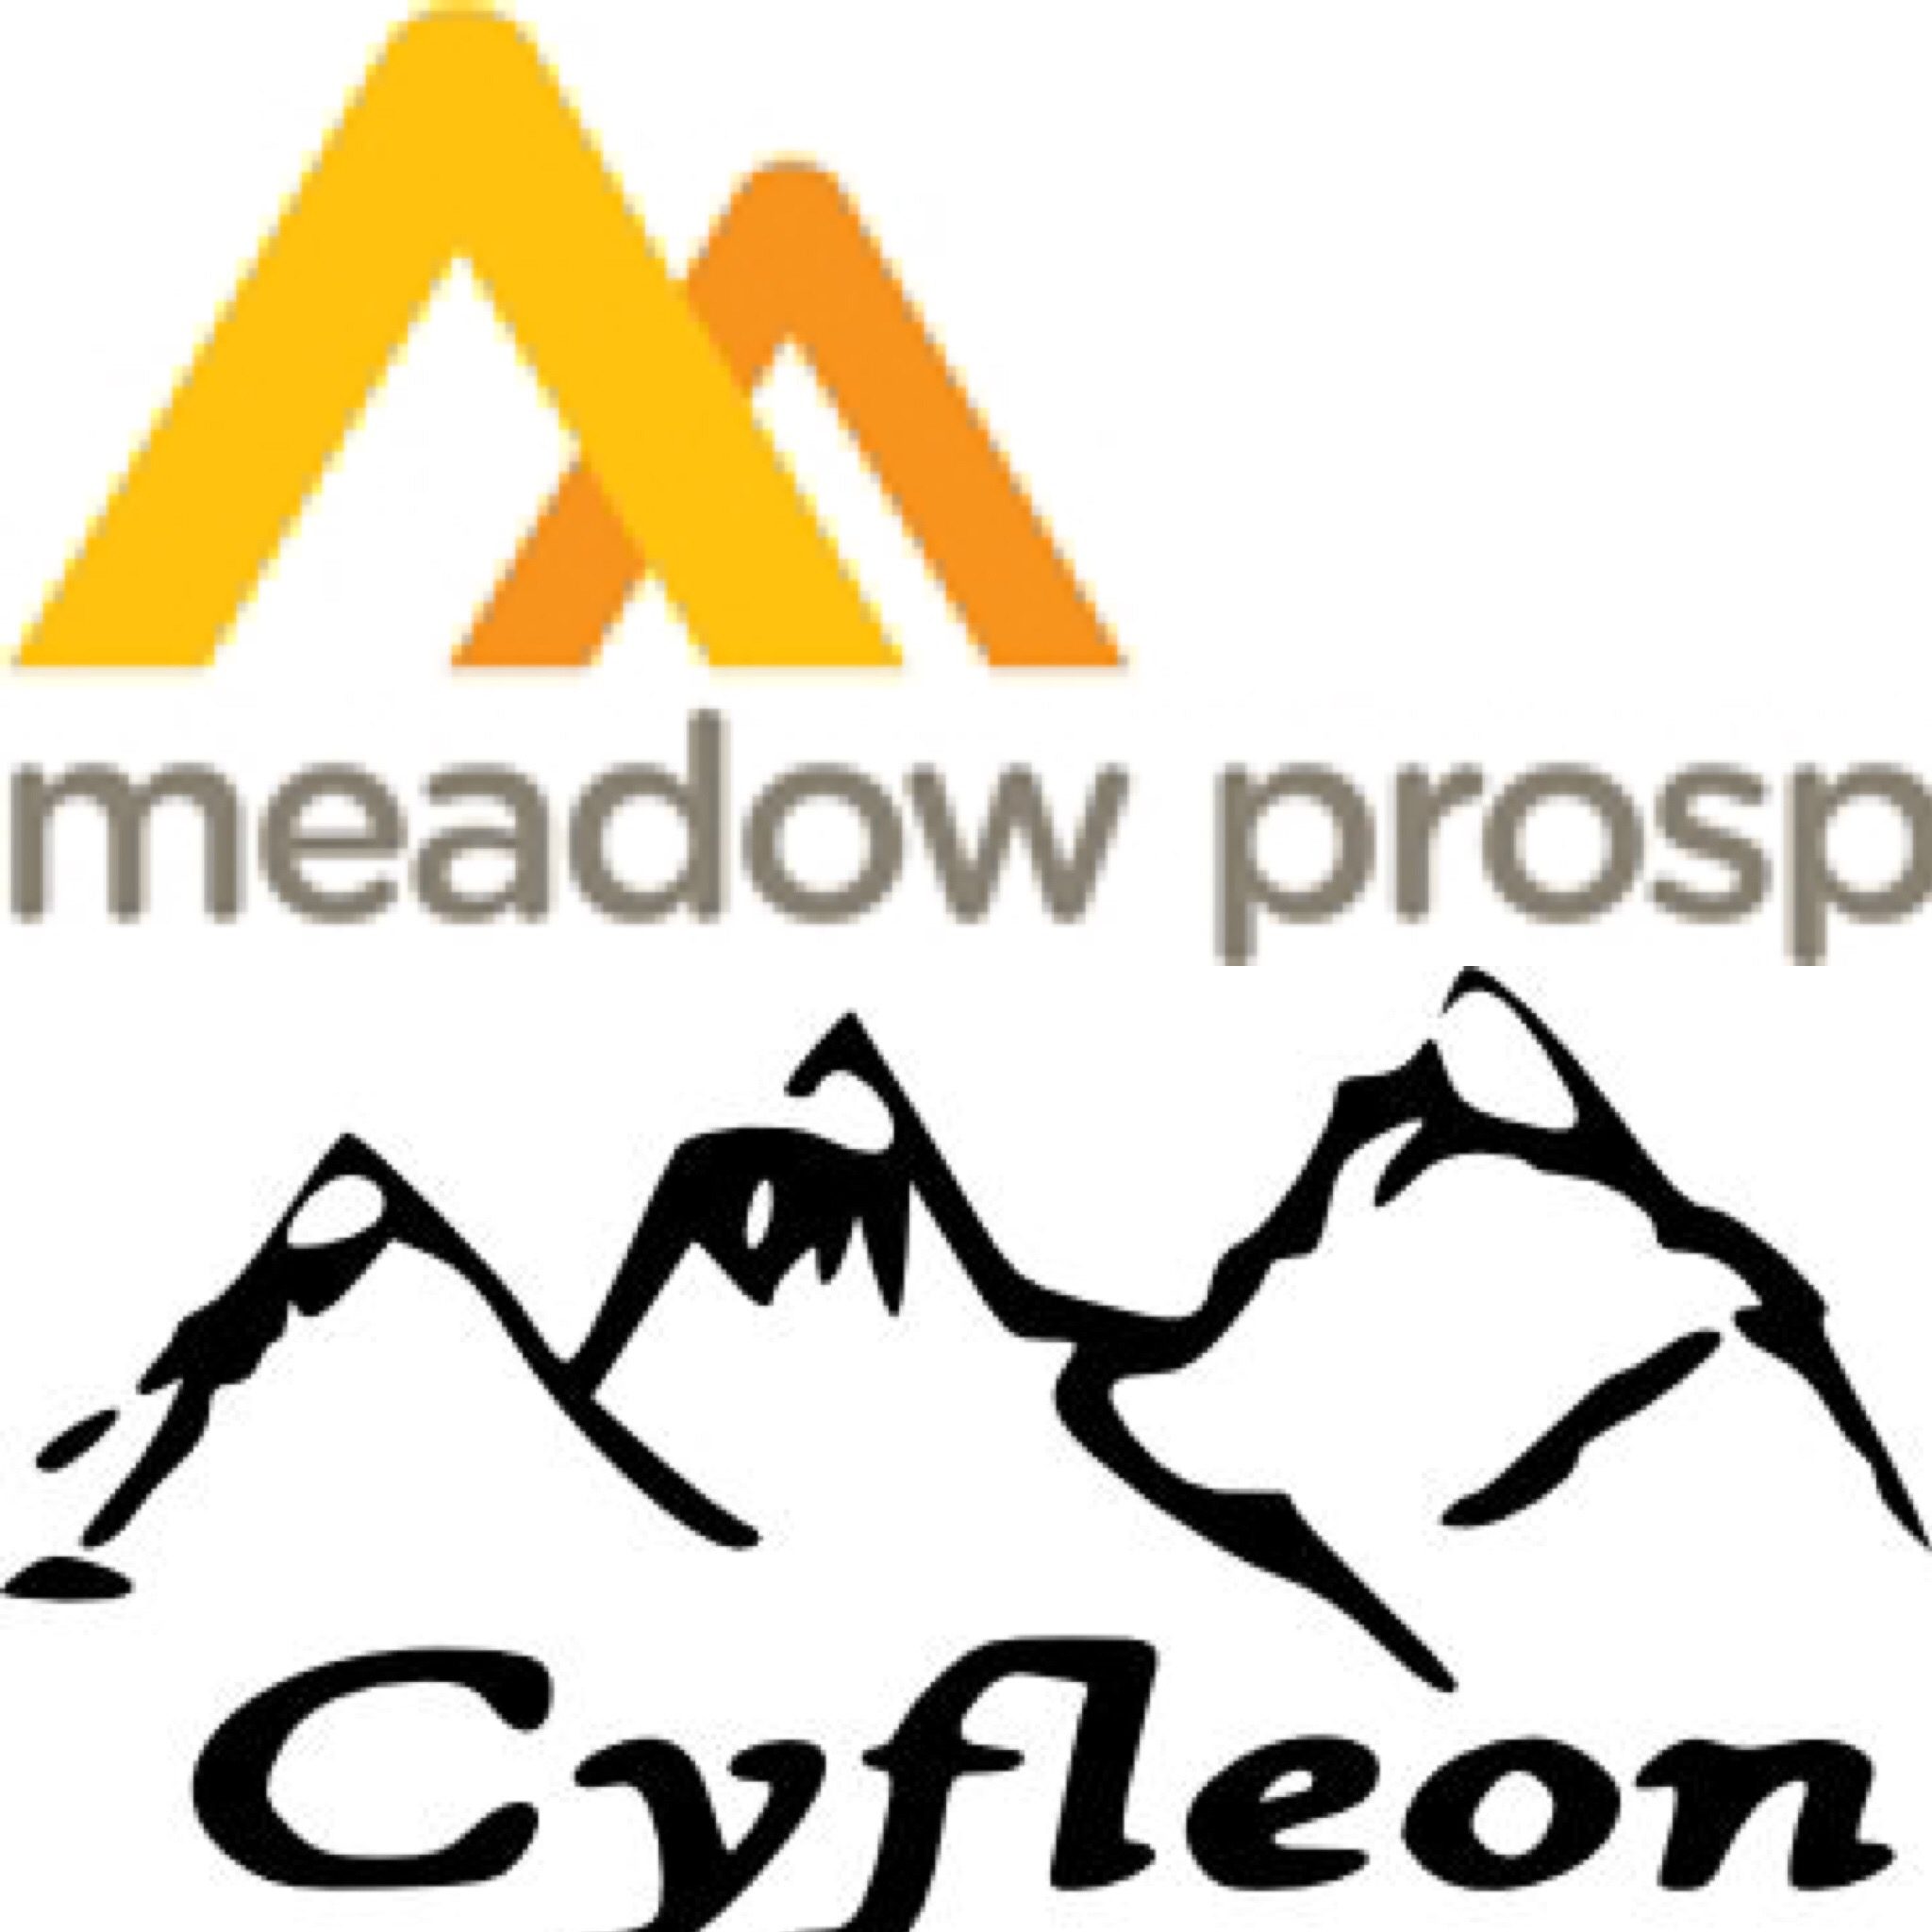 Amazing funding support from Meadow Prospect, RCT